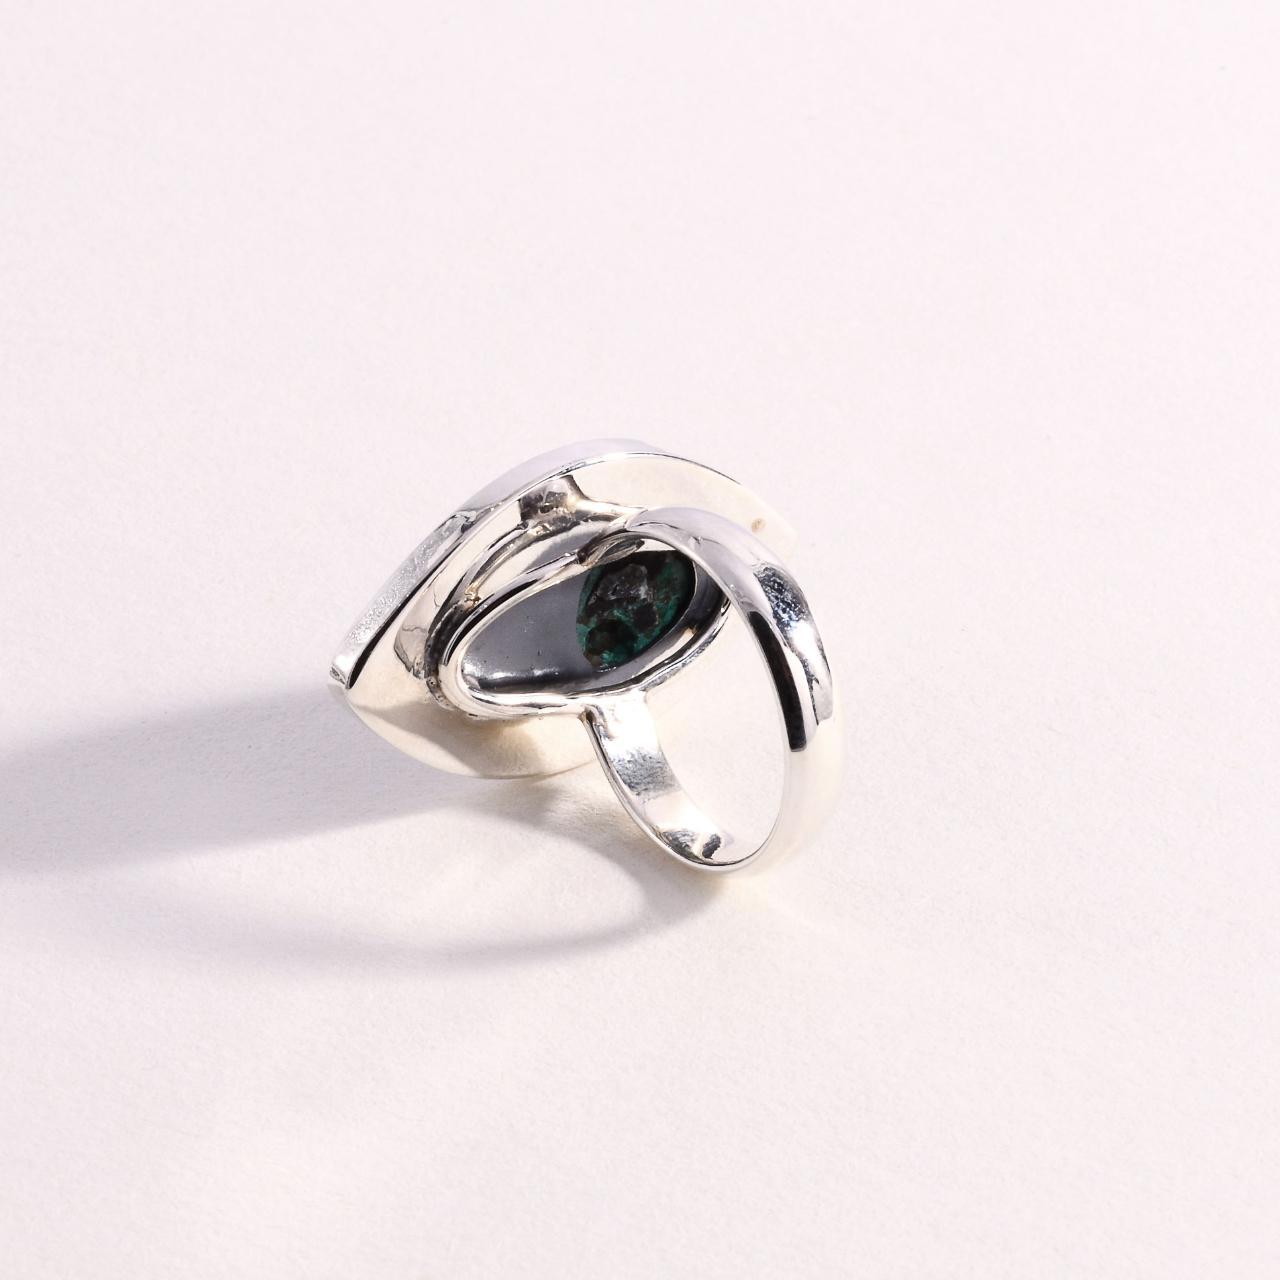 Product Image 4 - Sterling 925 Chrysocolla Ring

Sterling Silver

Size